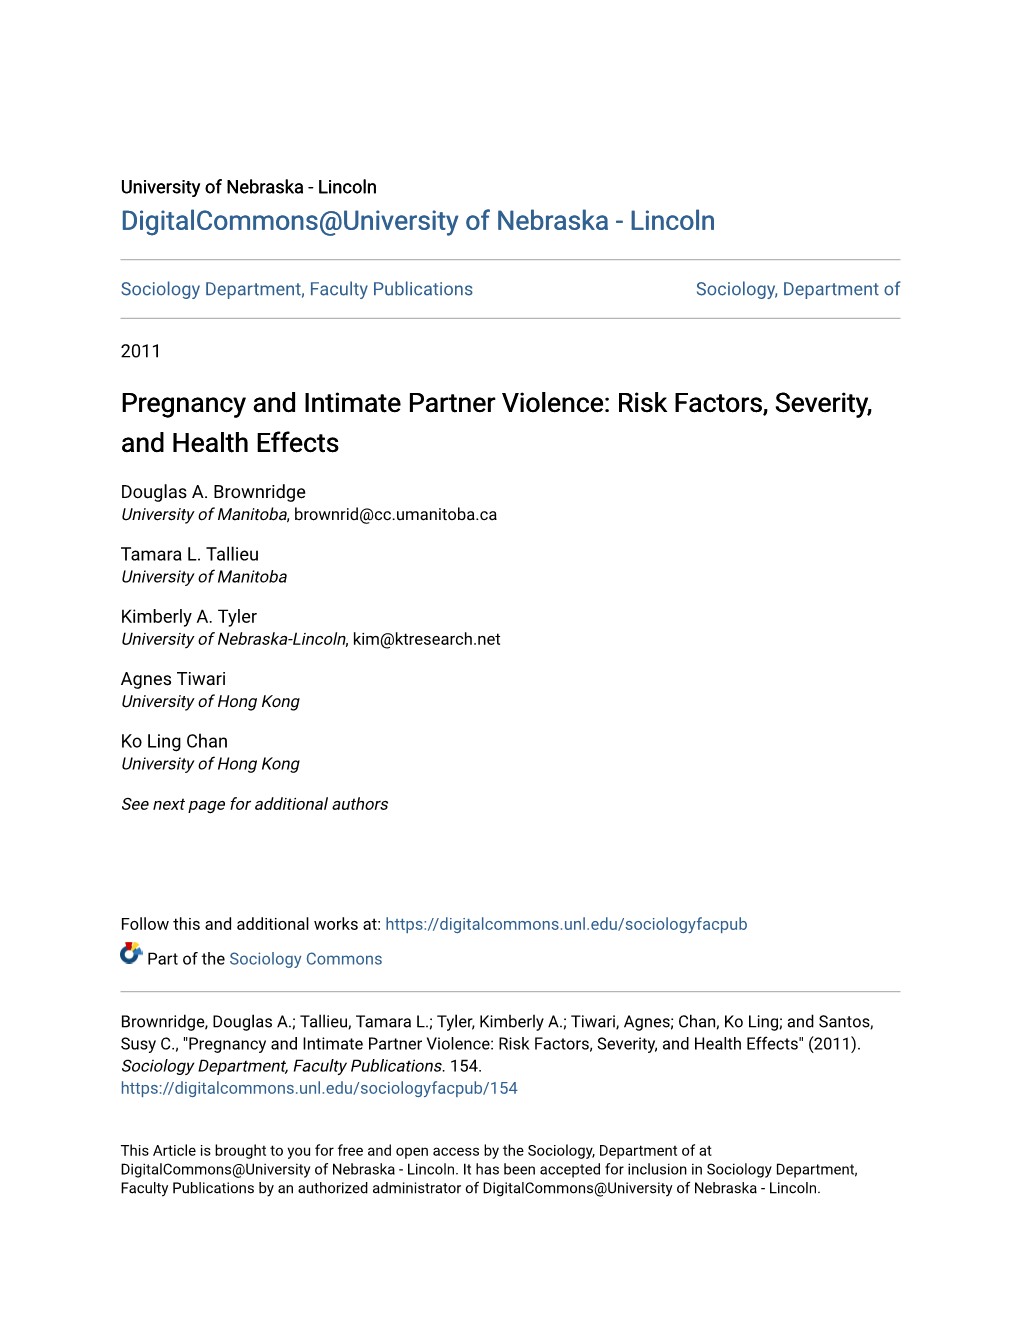 Pregnancy and Intimate Partner Violence: Risk Factors, Severity, and Health Effects